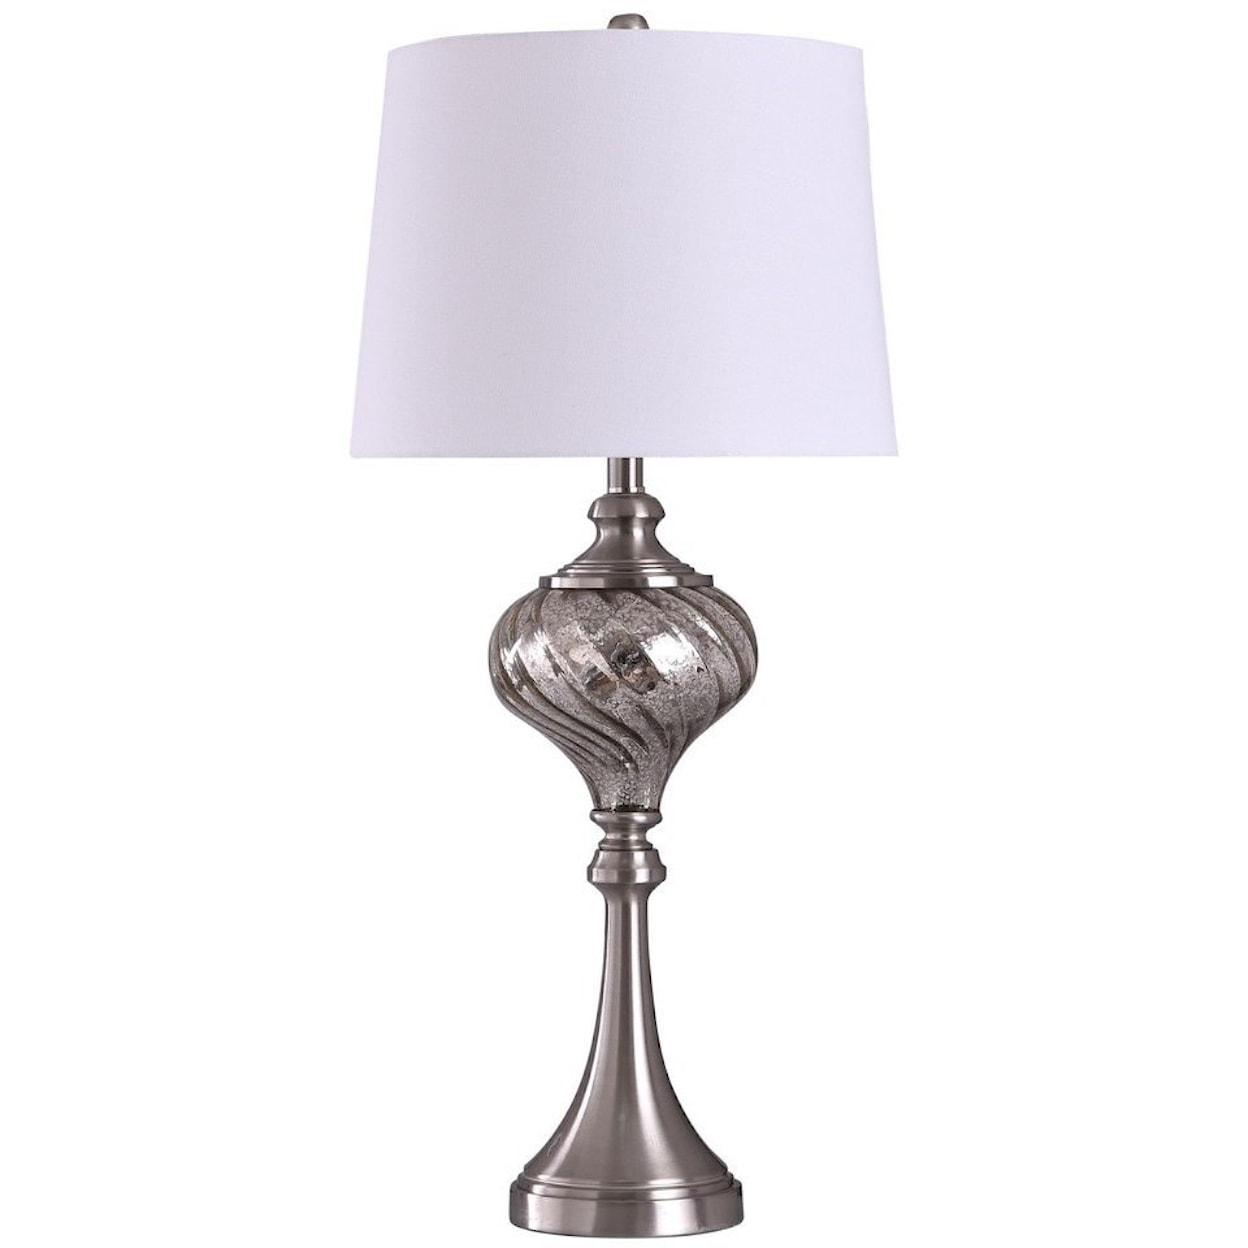 StyleCraft Lamps Northbay Brushed Steel Table Lamp